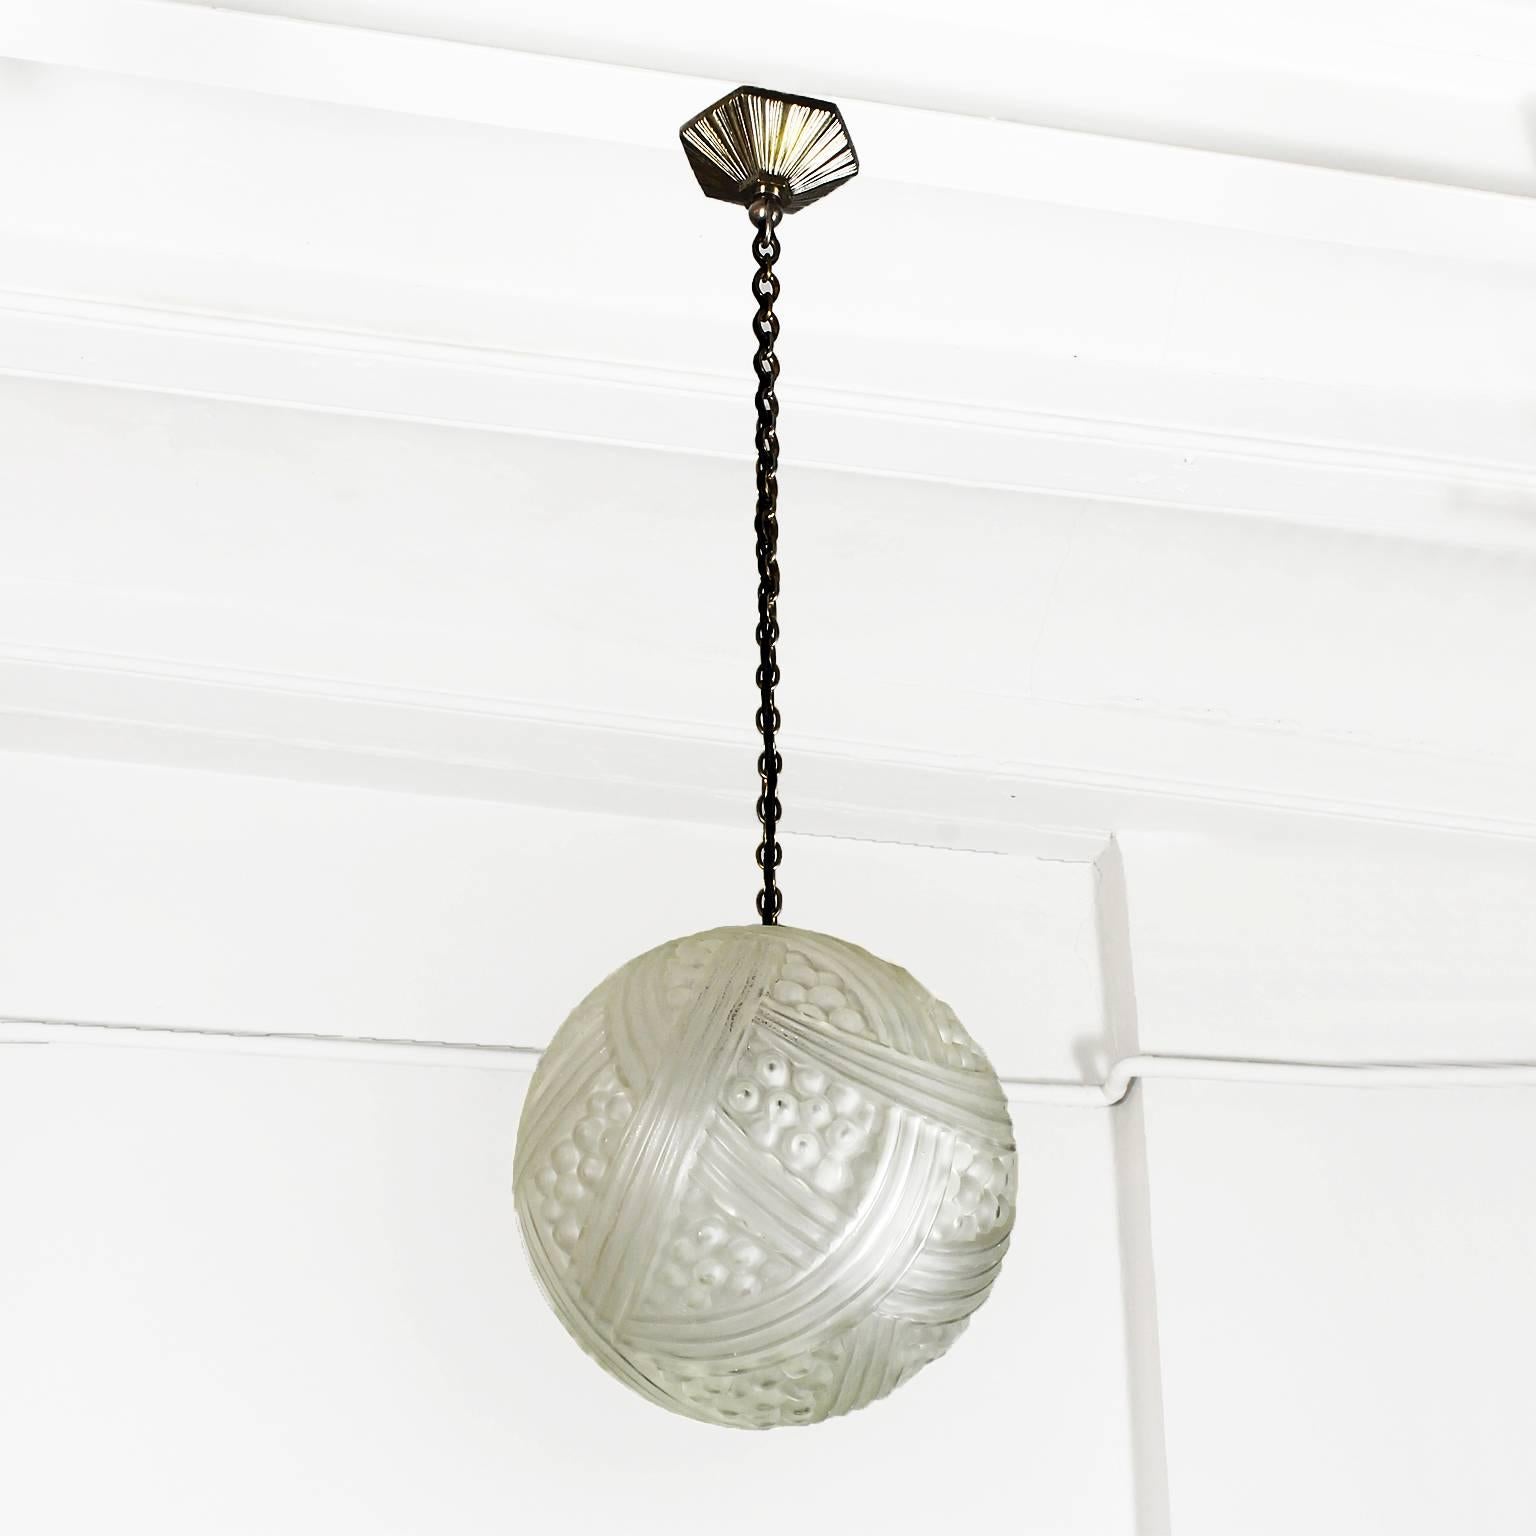 Spectacular set of three Art Deco lightning balls in pressed glass, silver plated bronze chains and hardware, new twisted wiring like the original.
Maker: Hettier - Vincent

France, Paris 1925.